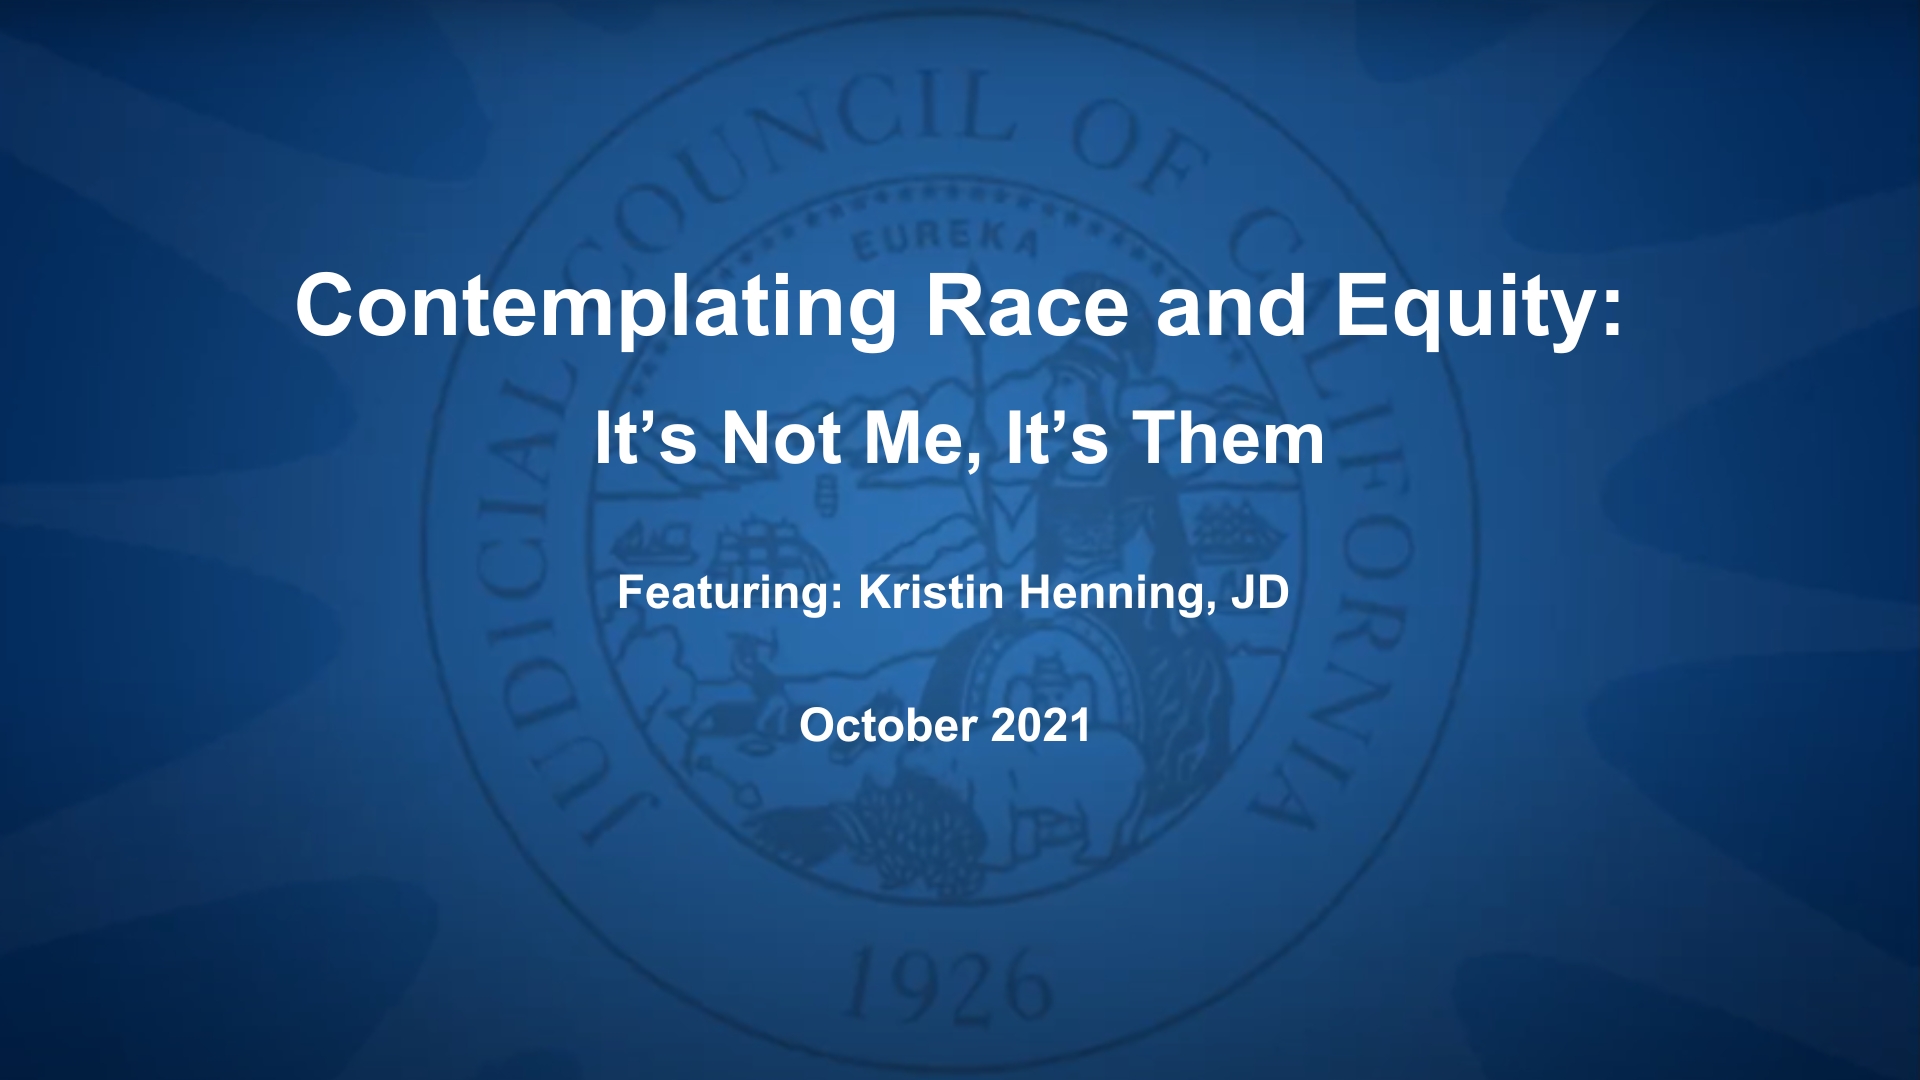 contemplating race, access to justice, and equity